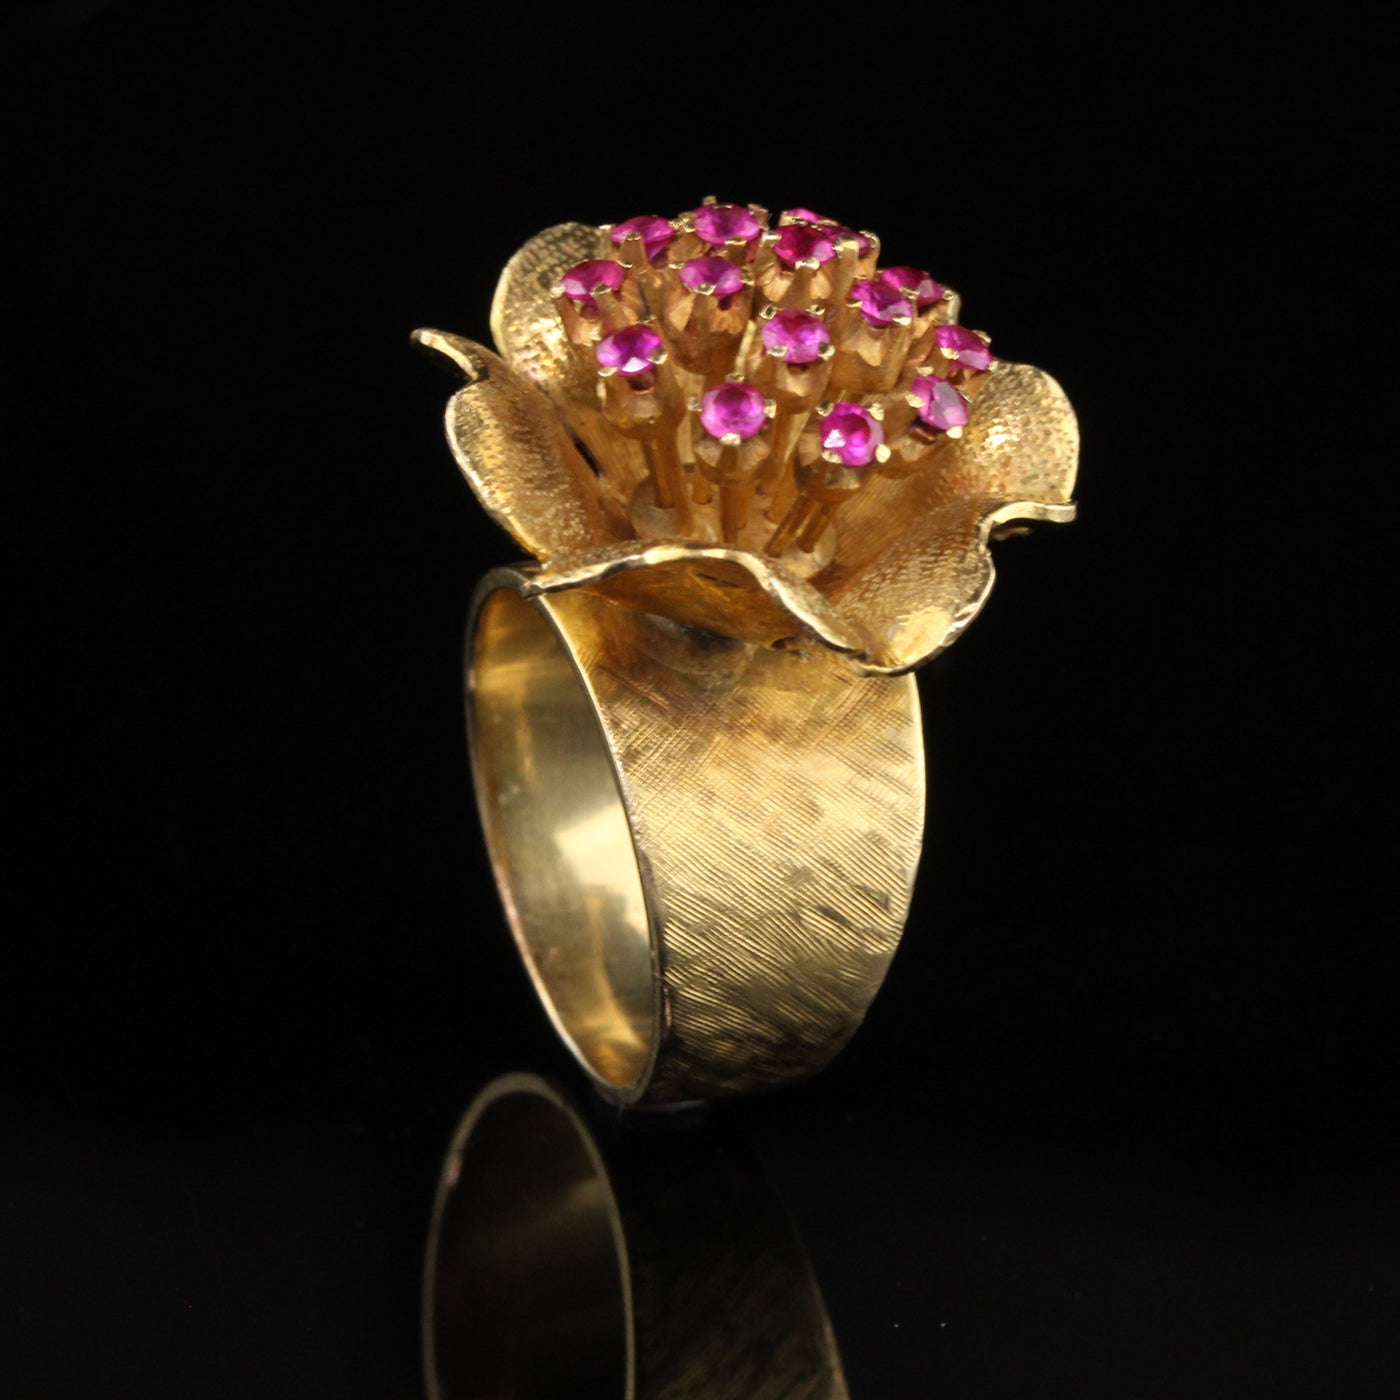 Vintage 14K Yellow Gold Ruby and Engraved Flower Ring